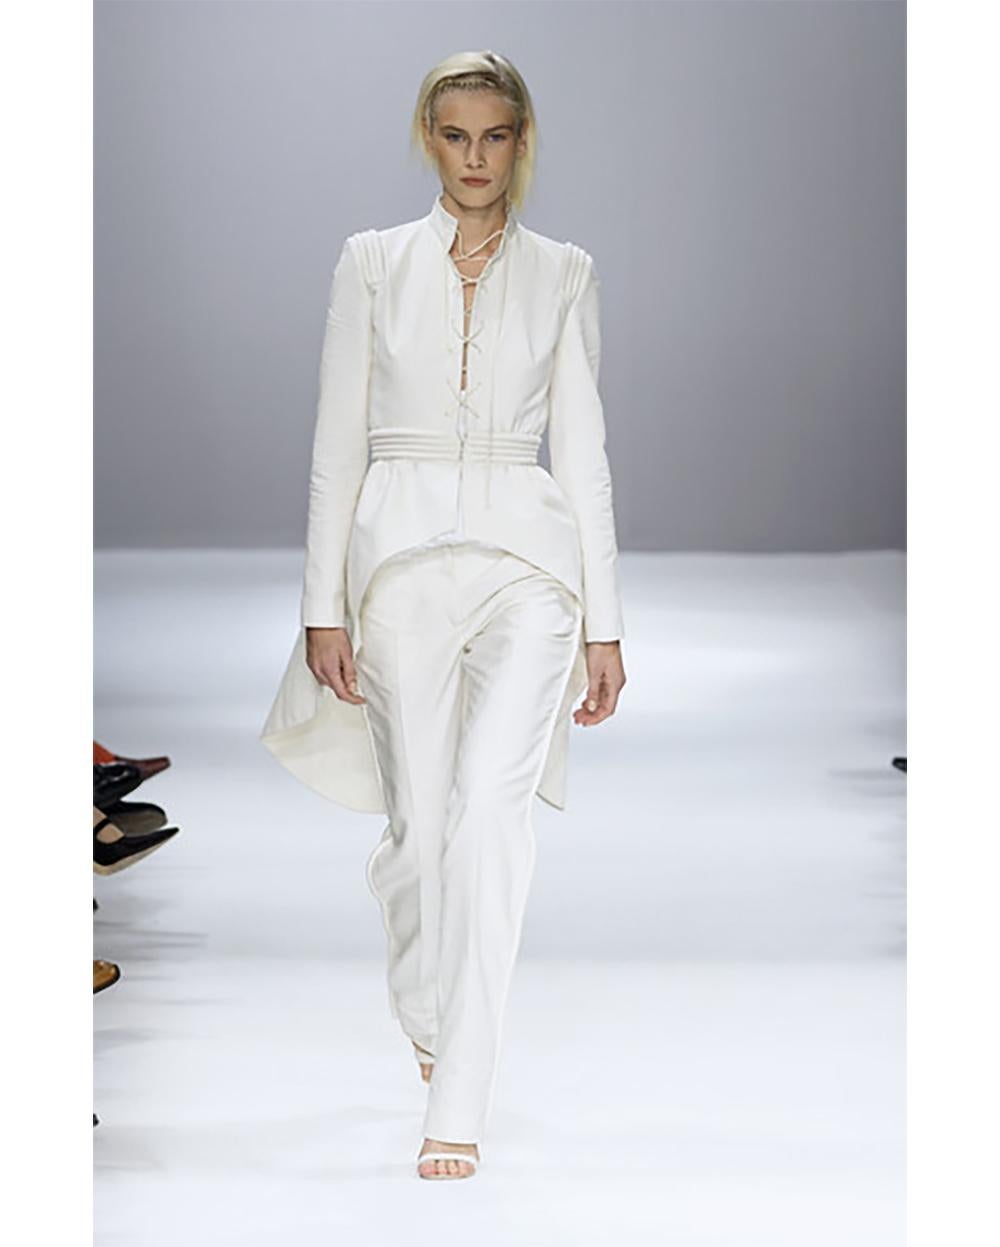 S/S 2002 Givenchy Cotton Cream High-Low Jacket and Pant Set 1